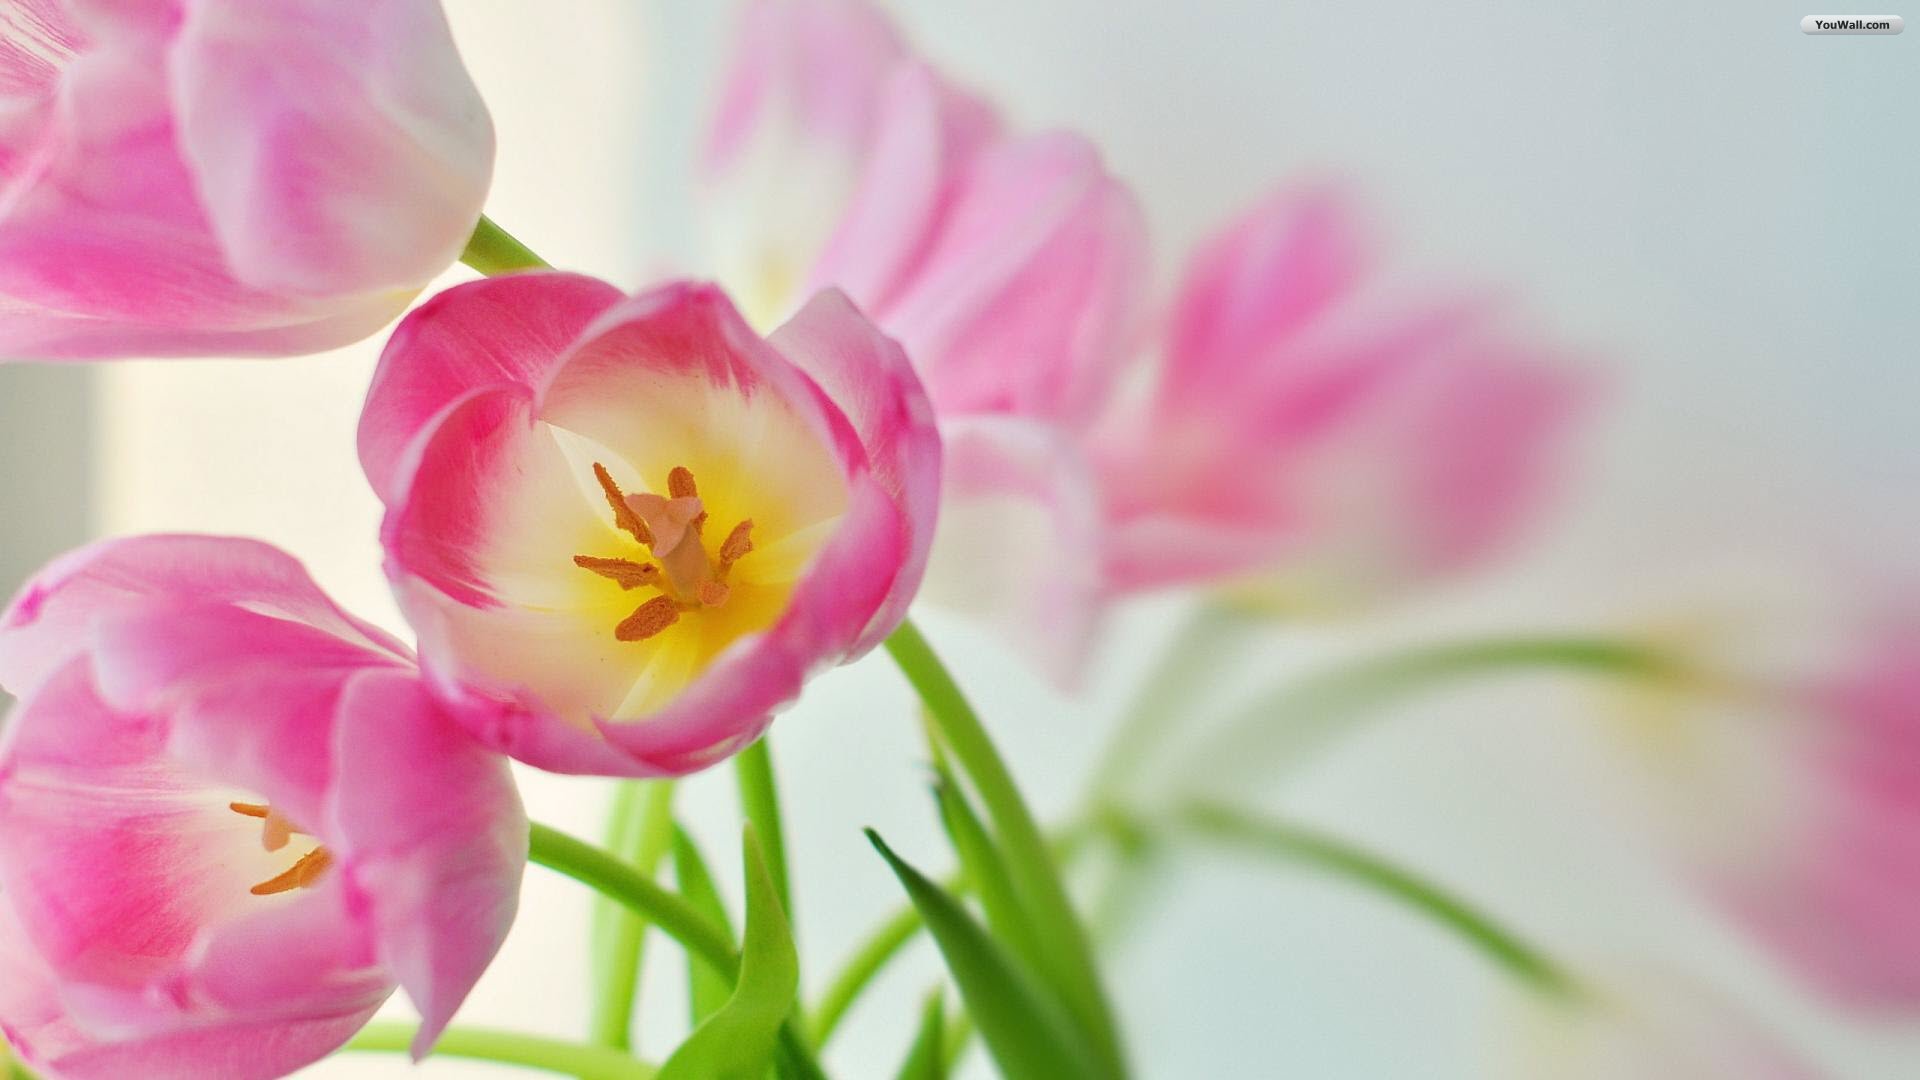 Tulips Wallpapers for Computer Desktop Full HD Pictures